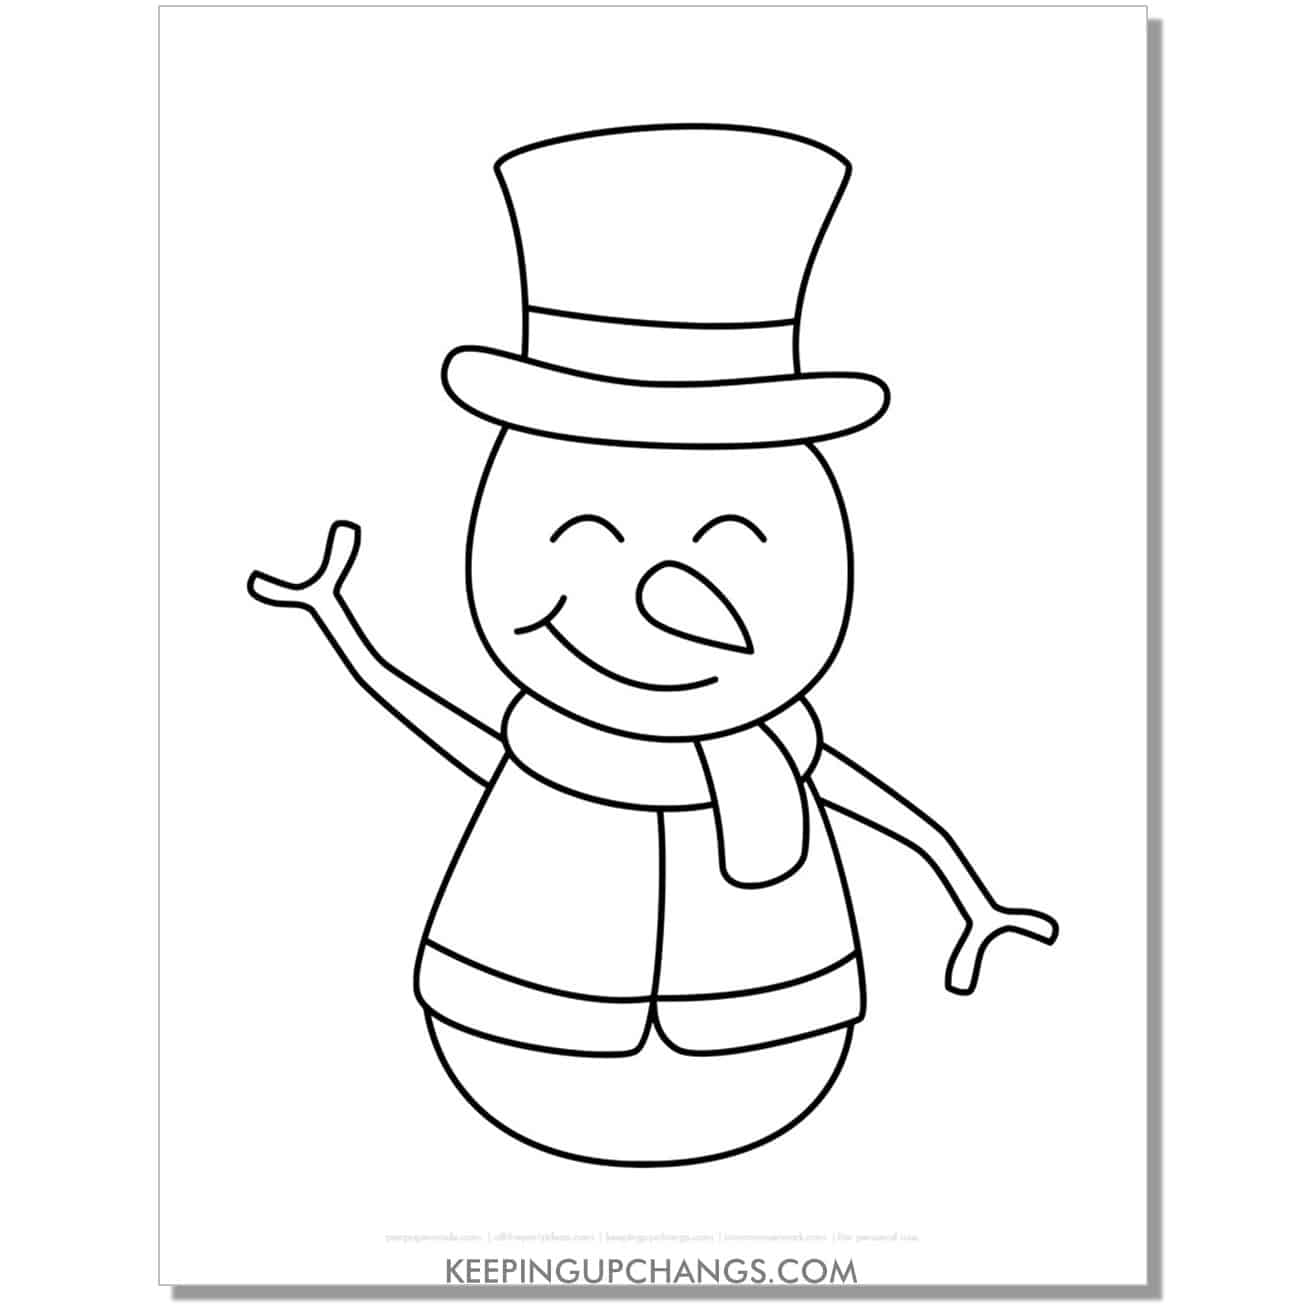 free simple snowman with top hat coloring page.